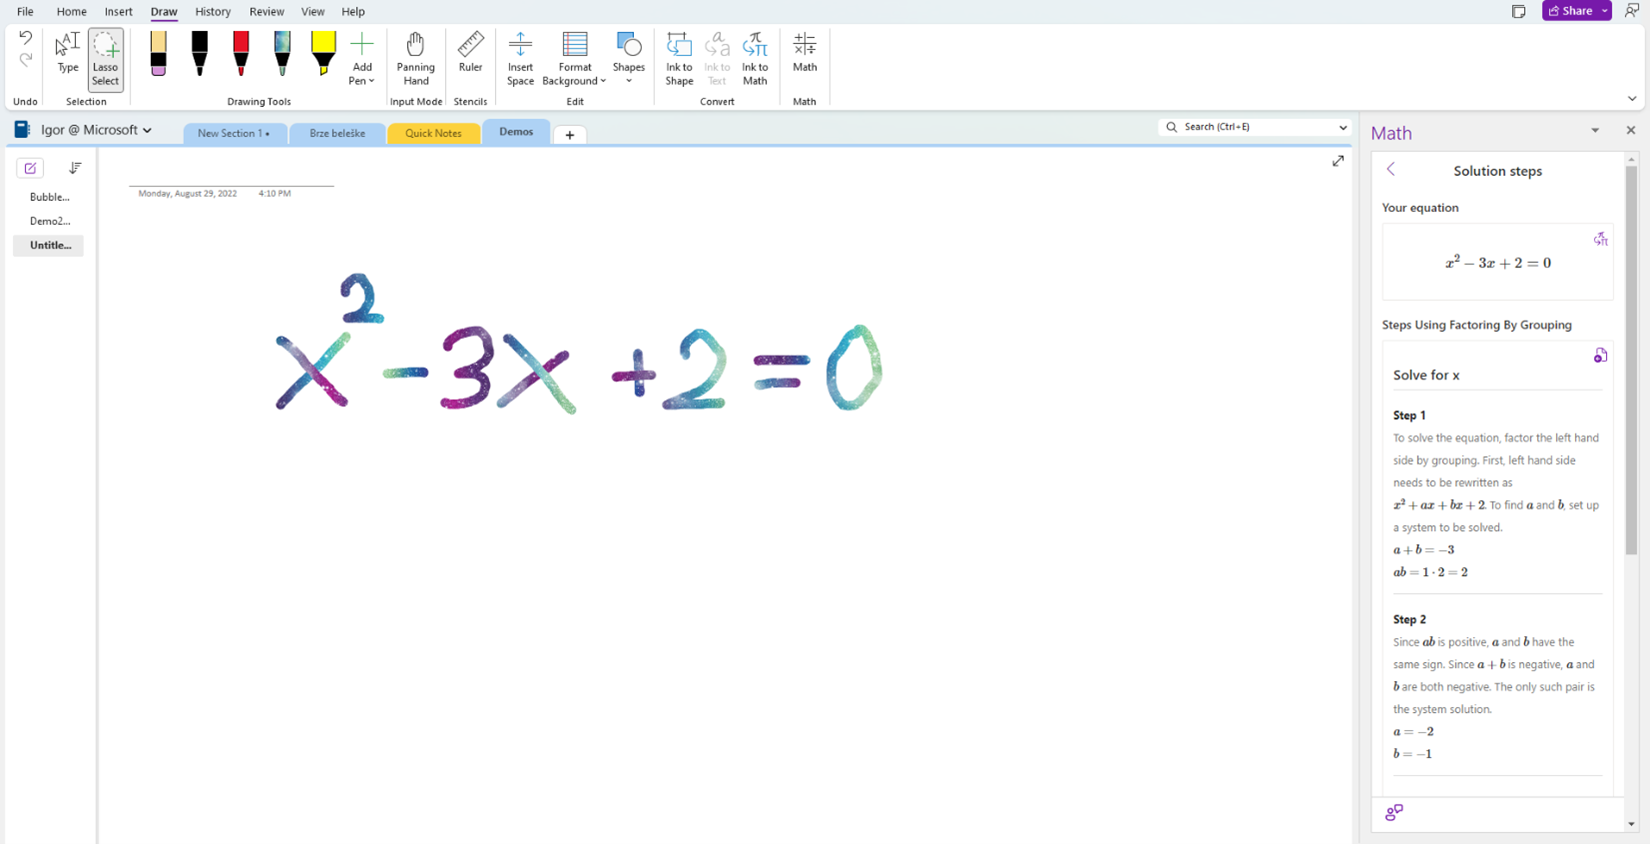 Math Assistant feature now in OneNote for handwritten equations